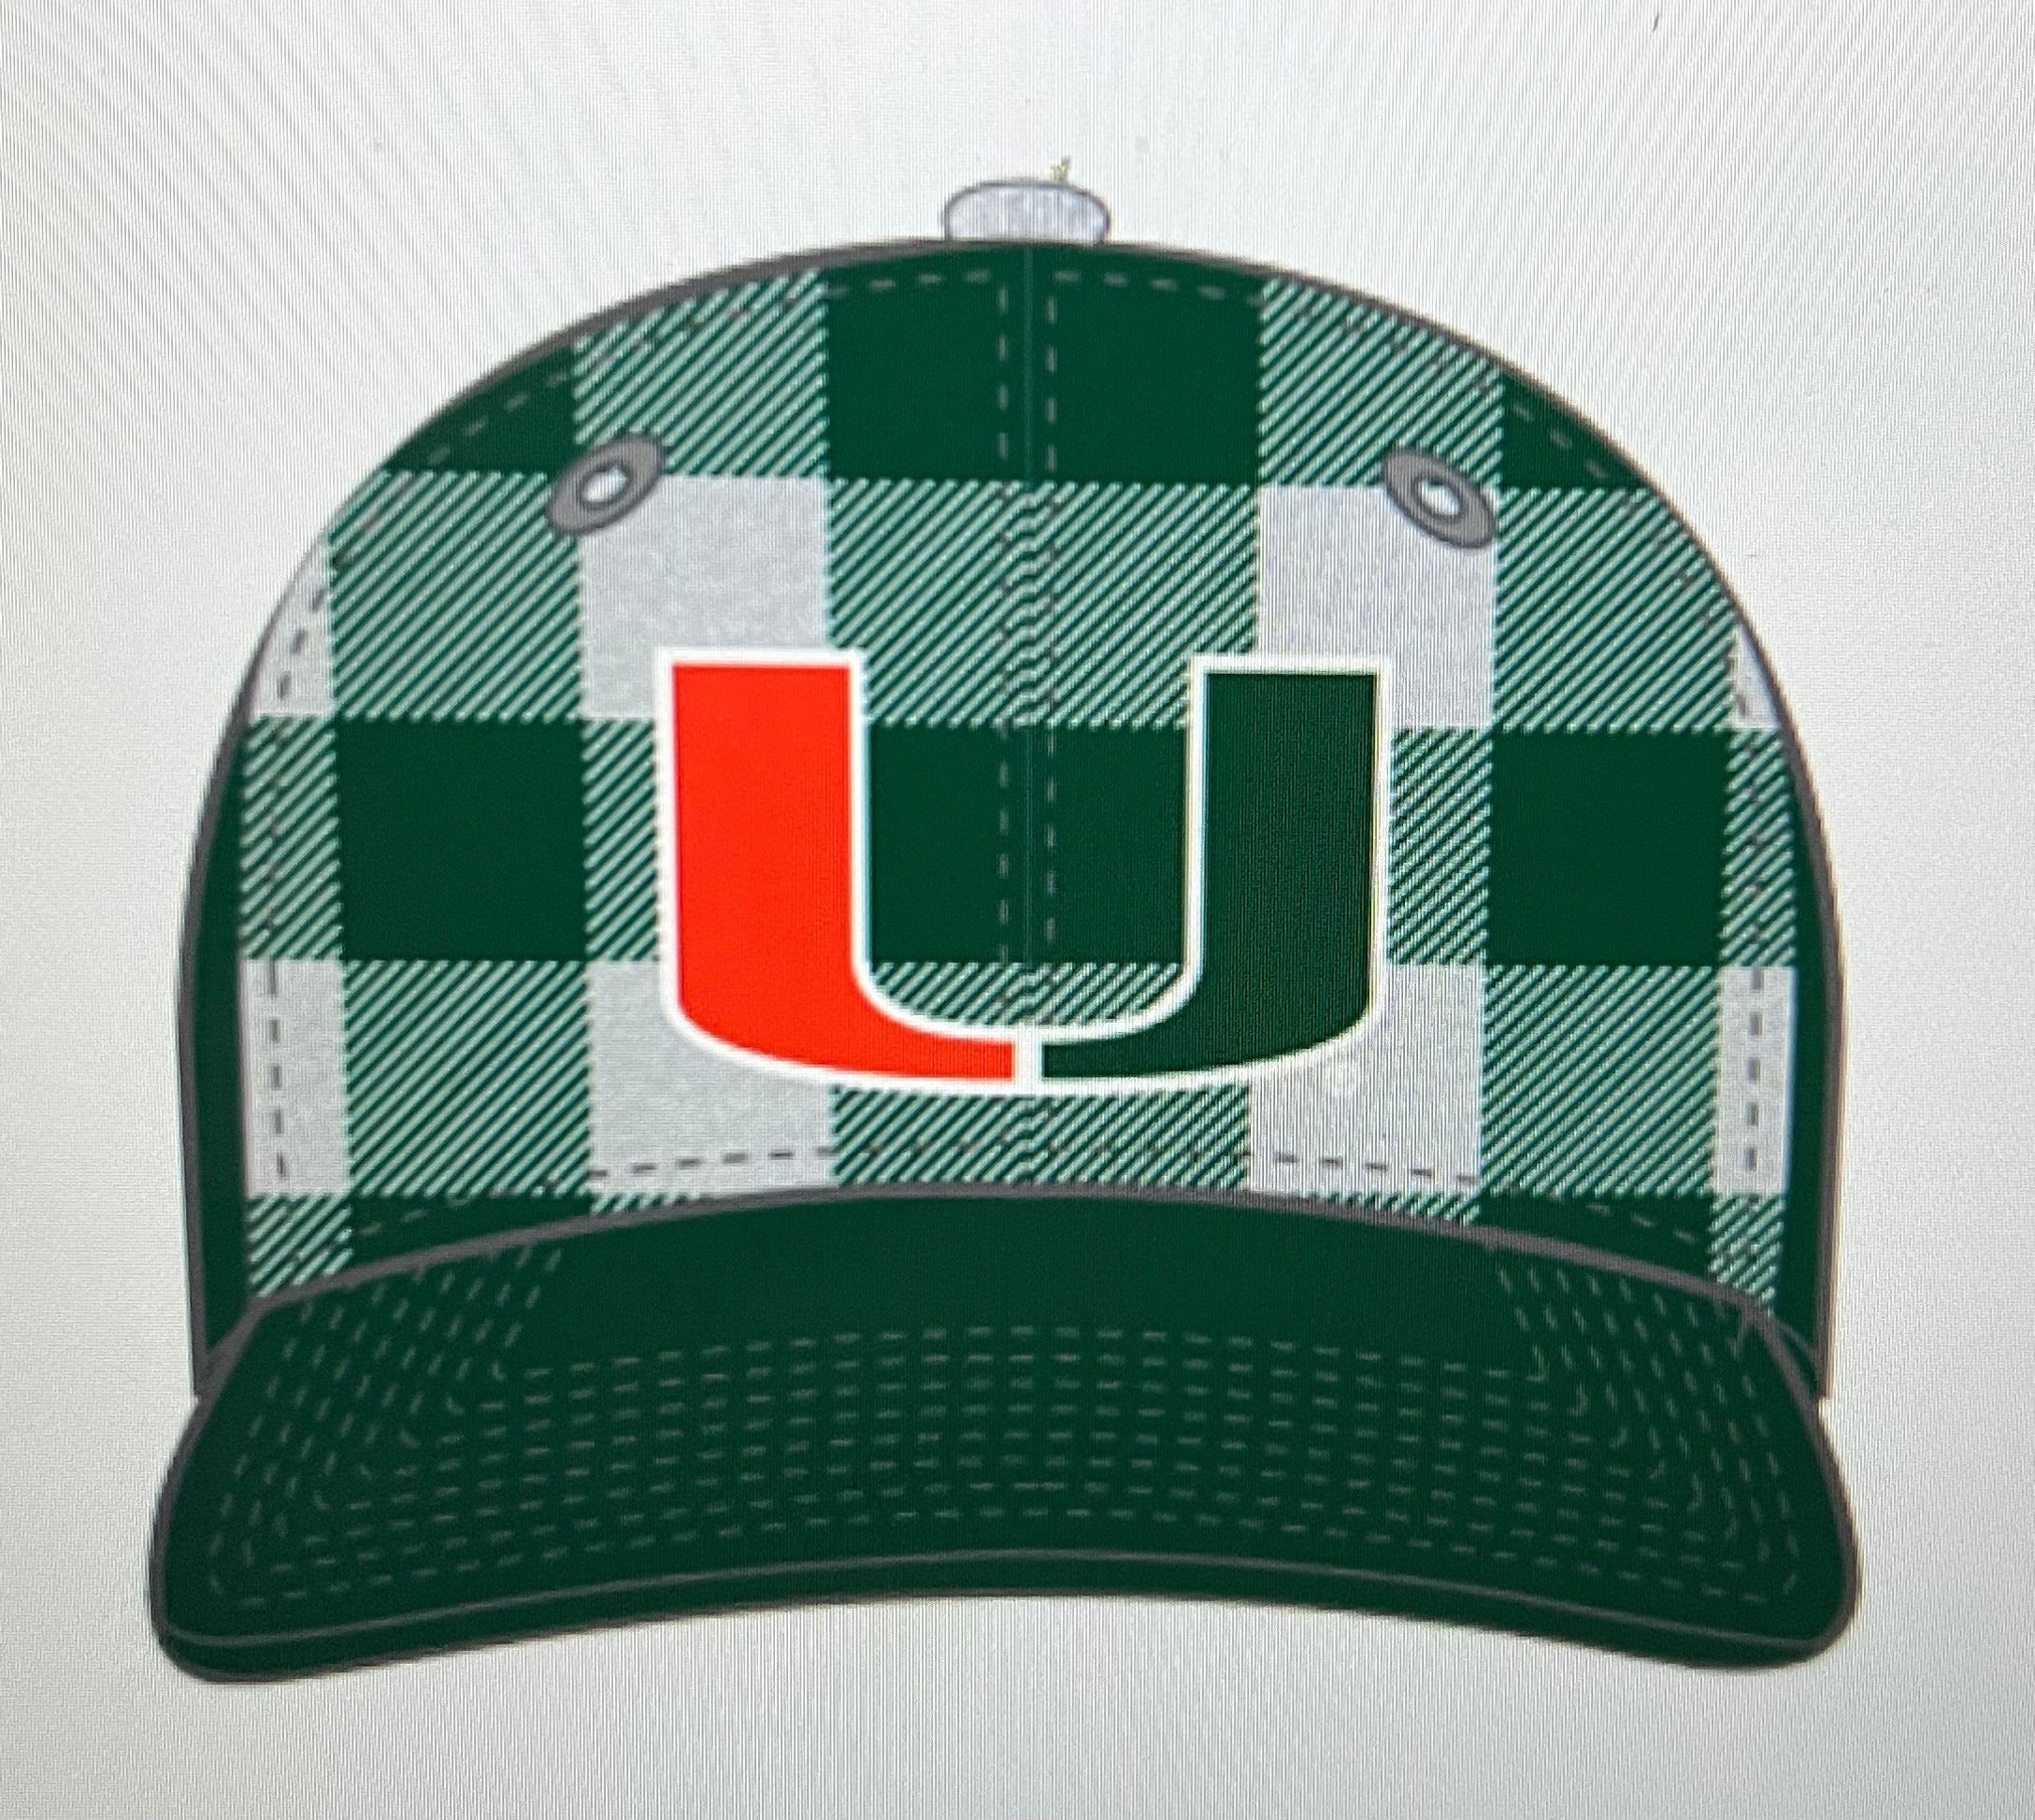 Miami Hurricanes TOW Jack Flannel Adjustable Hat - Green